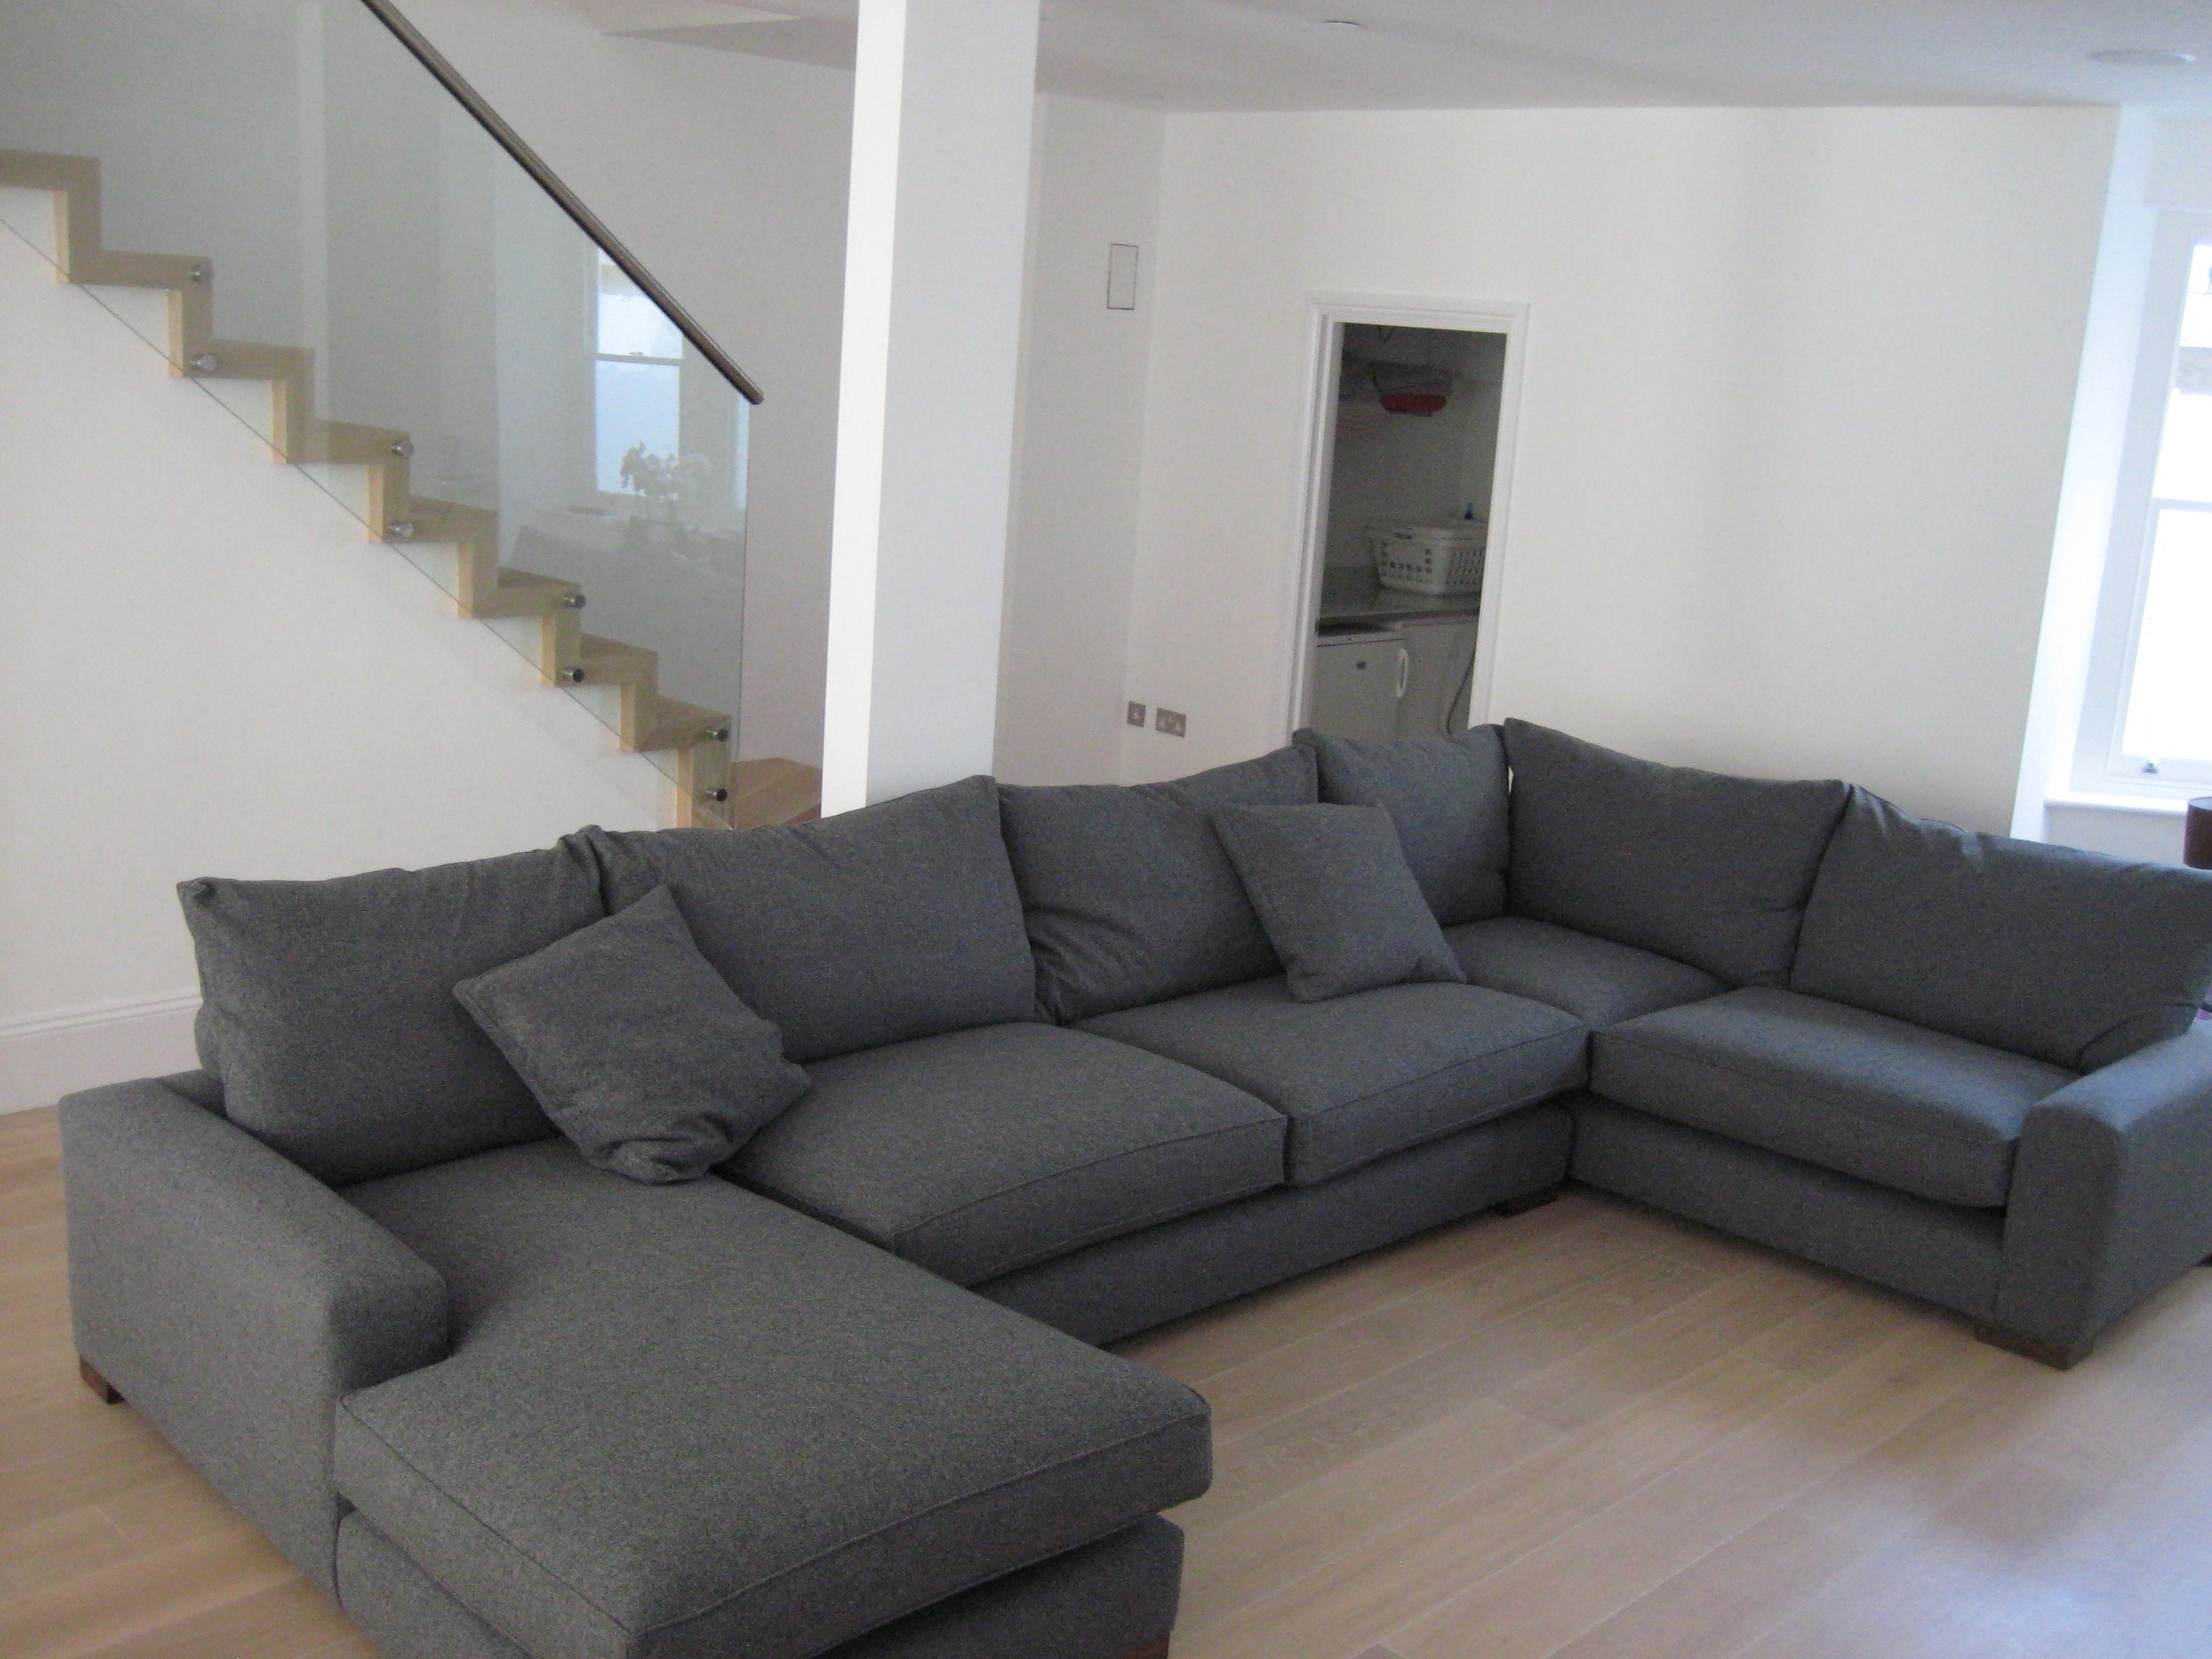 Most Popular Bespoke Corner And Chaise Unit Based On The Freycinet, With A Inside Grey Sofas With Chaise (View 13 of 15)